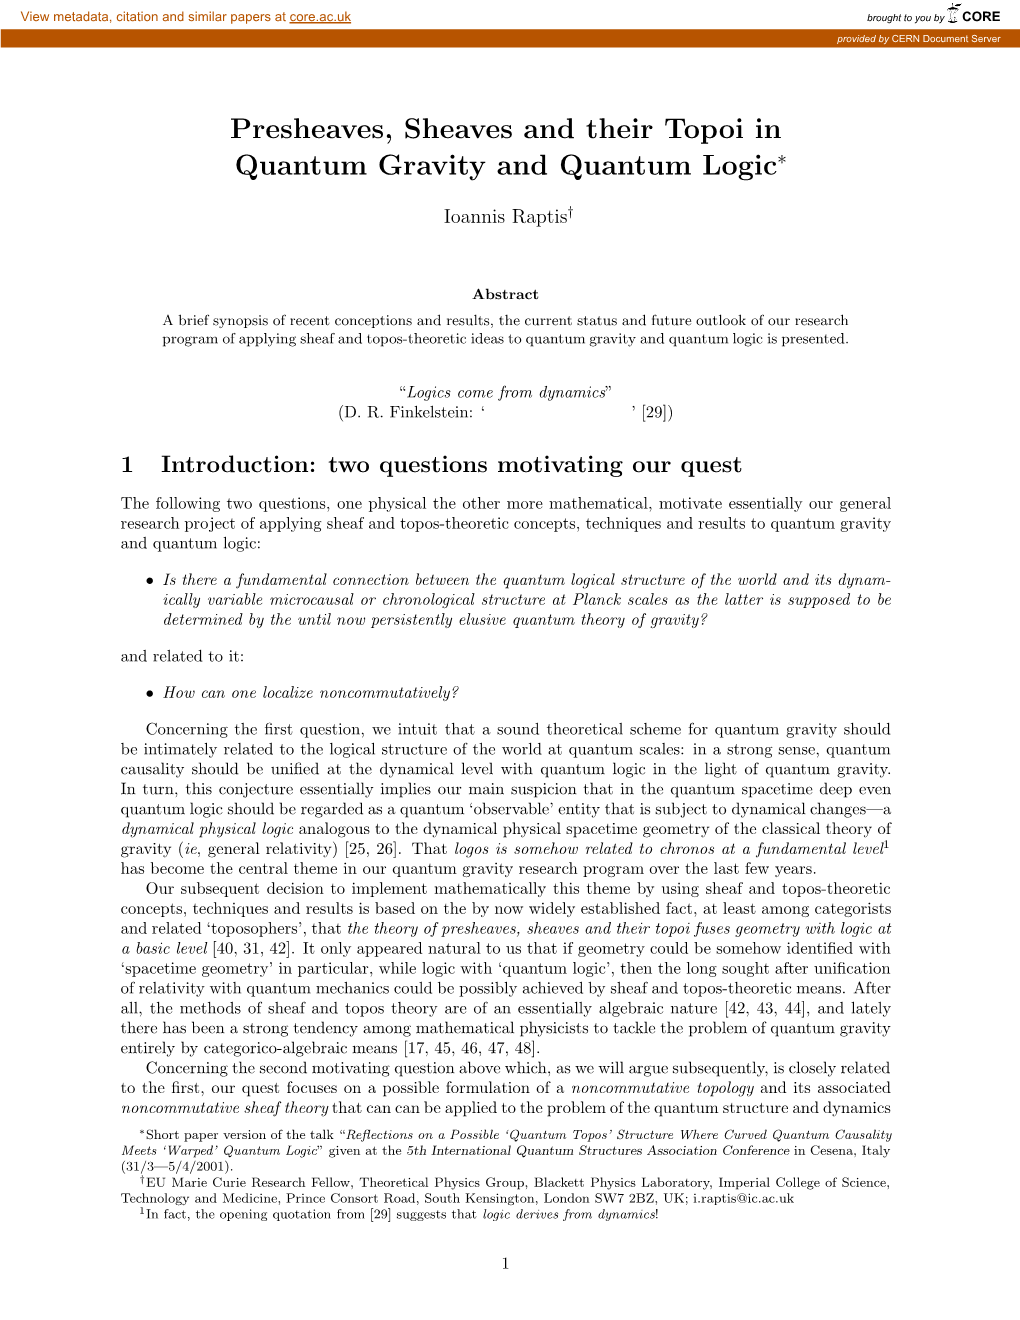 Presheaves, Sheaves and Their Topoi in Quantum Gravity and Quantum Logic∗